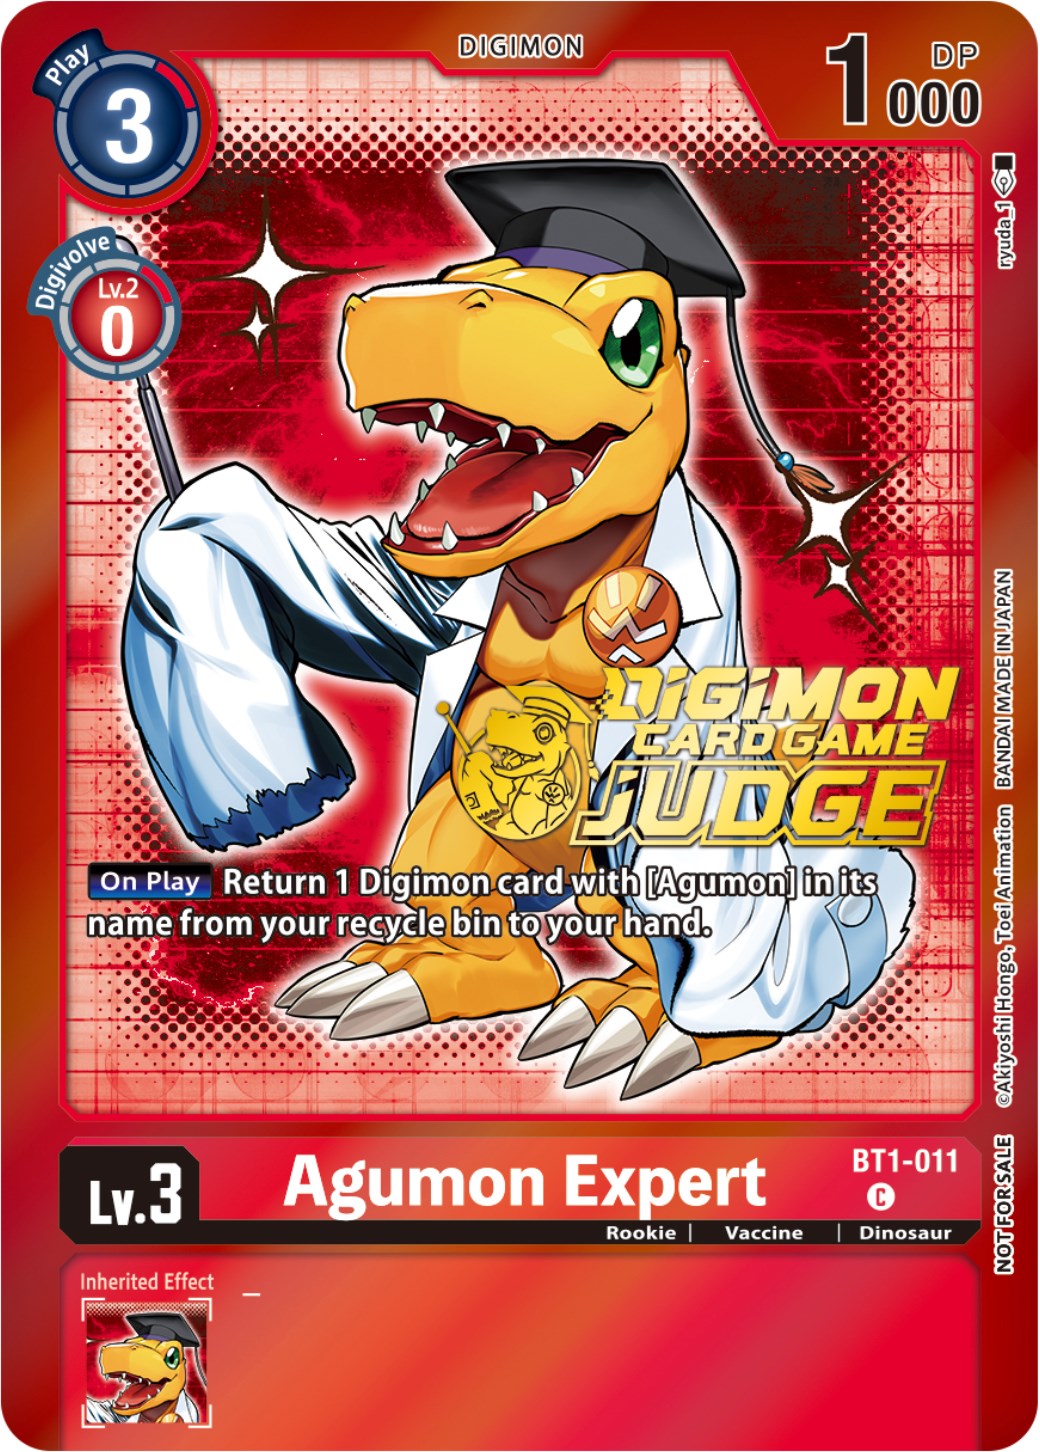 Agumon Expert [BT1-011] (Judge Pack 4) [Release Special Booster Promos]